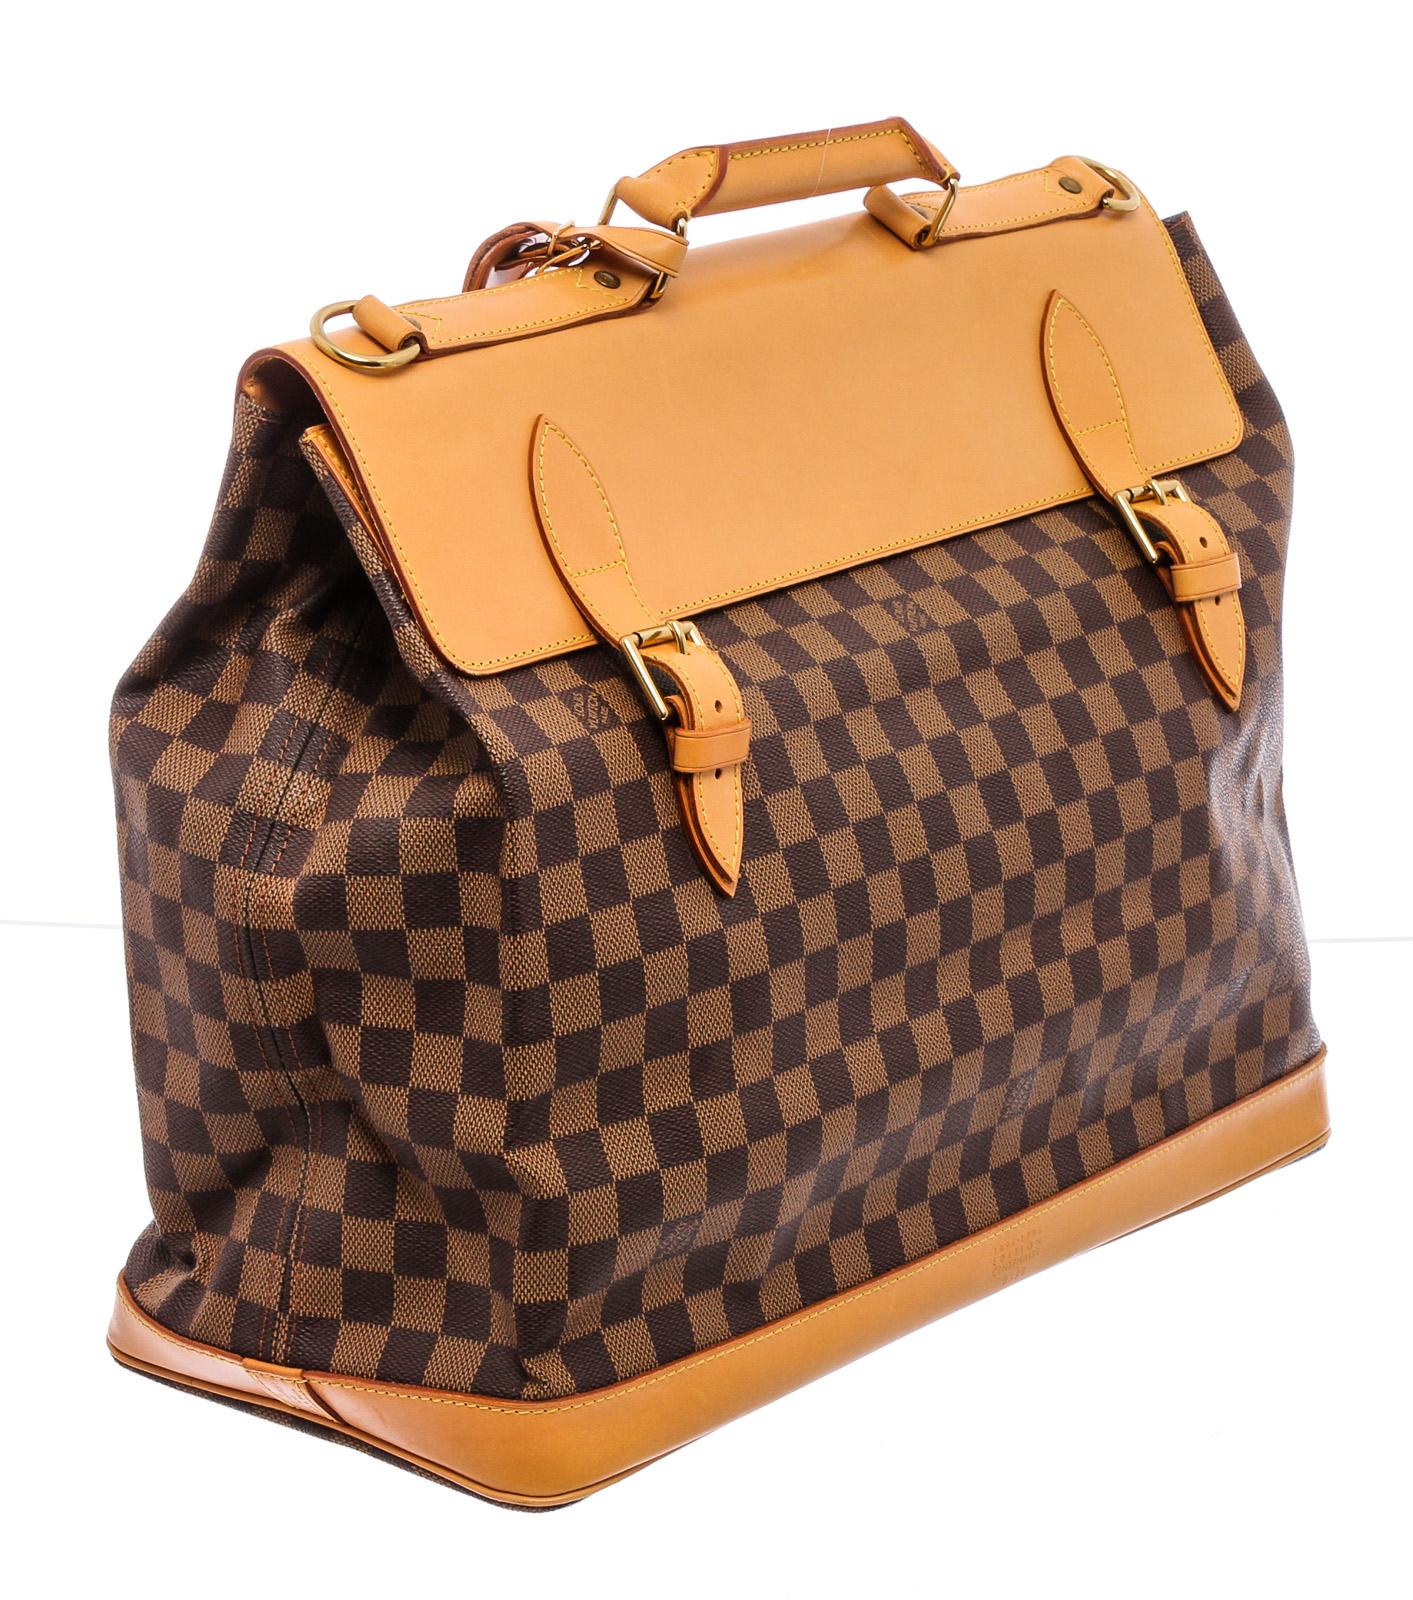 Limited 100 Year Anniversary Edition Louis Vuitton Centenaire West End travel bag is crafted of Damier check toile canvas in brown. The bag features extensive vachetta cowhide leather embellishment including a sturdy top handle with brass links,